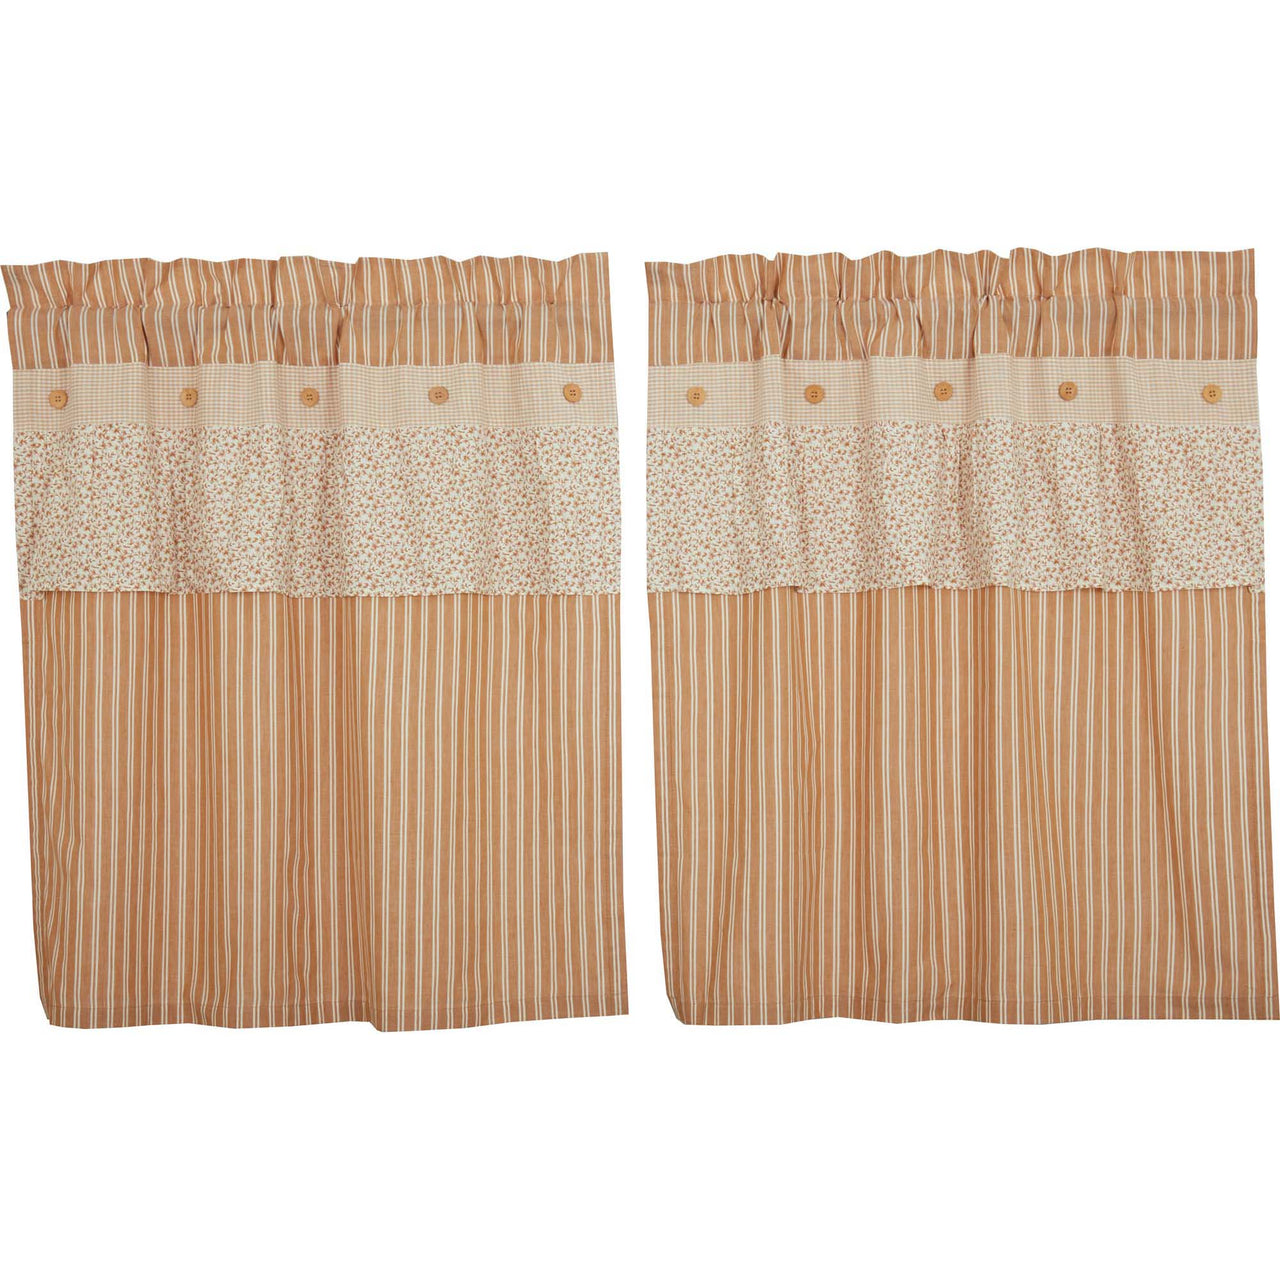 Camilia Ruffled Tier Set of 2 L36xW36 VHC Brands